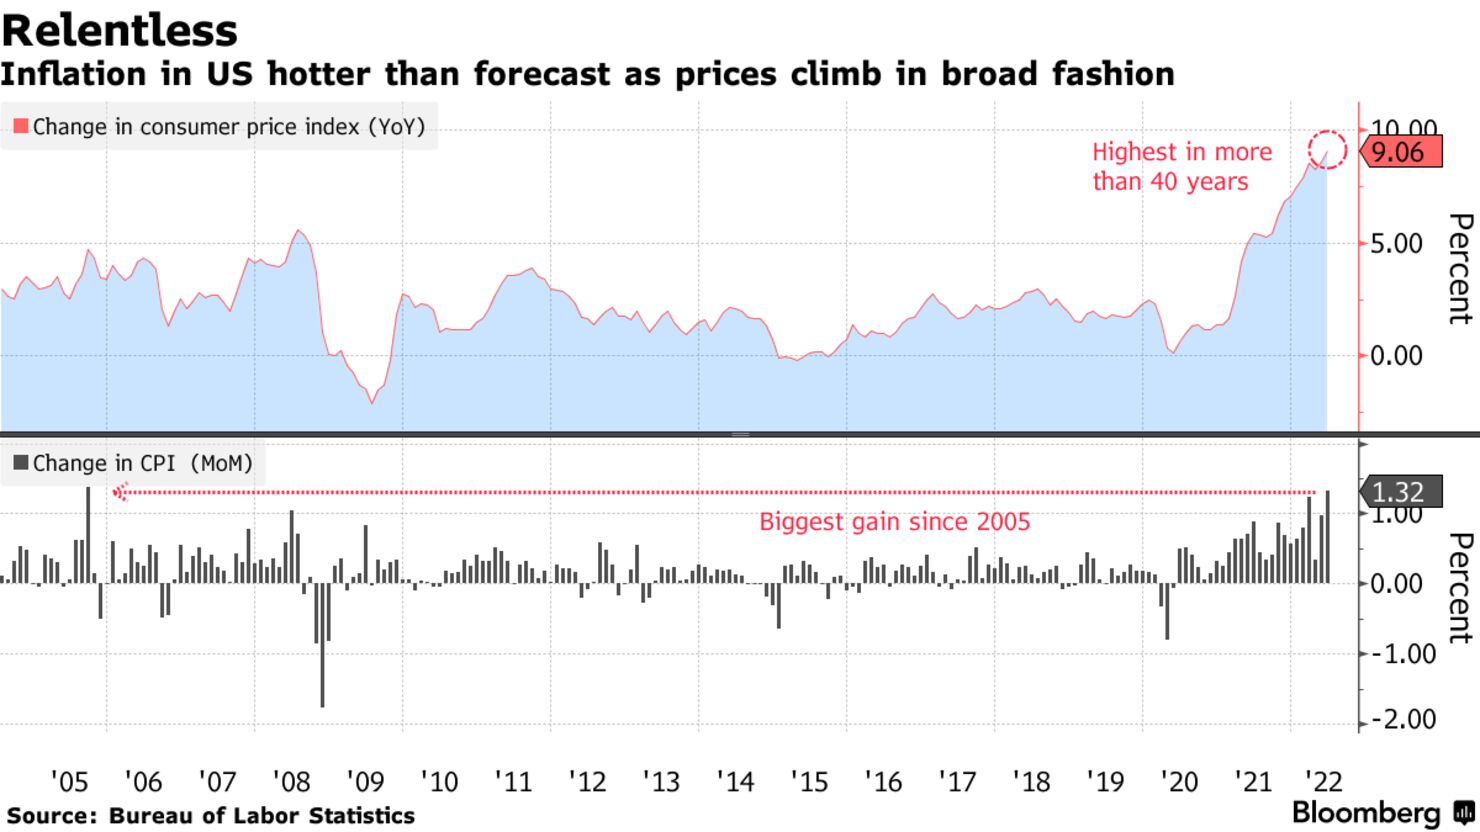 Inflation in US hotter than forecast as prices climb in broad fashion